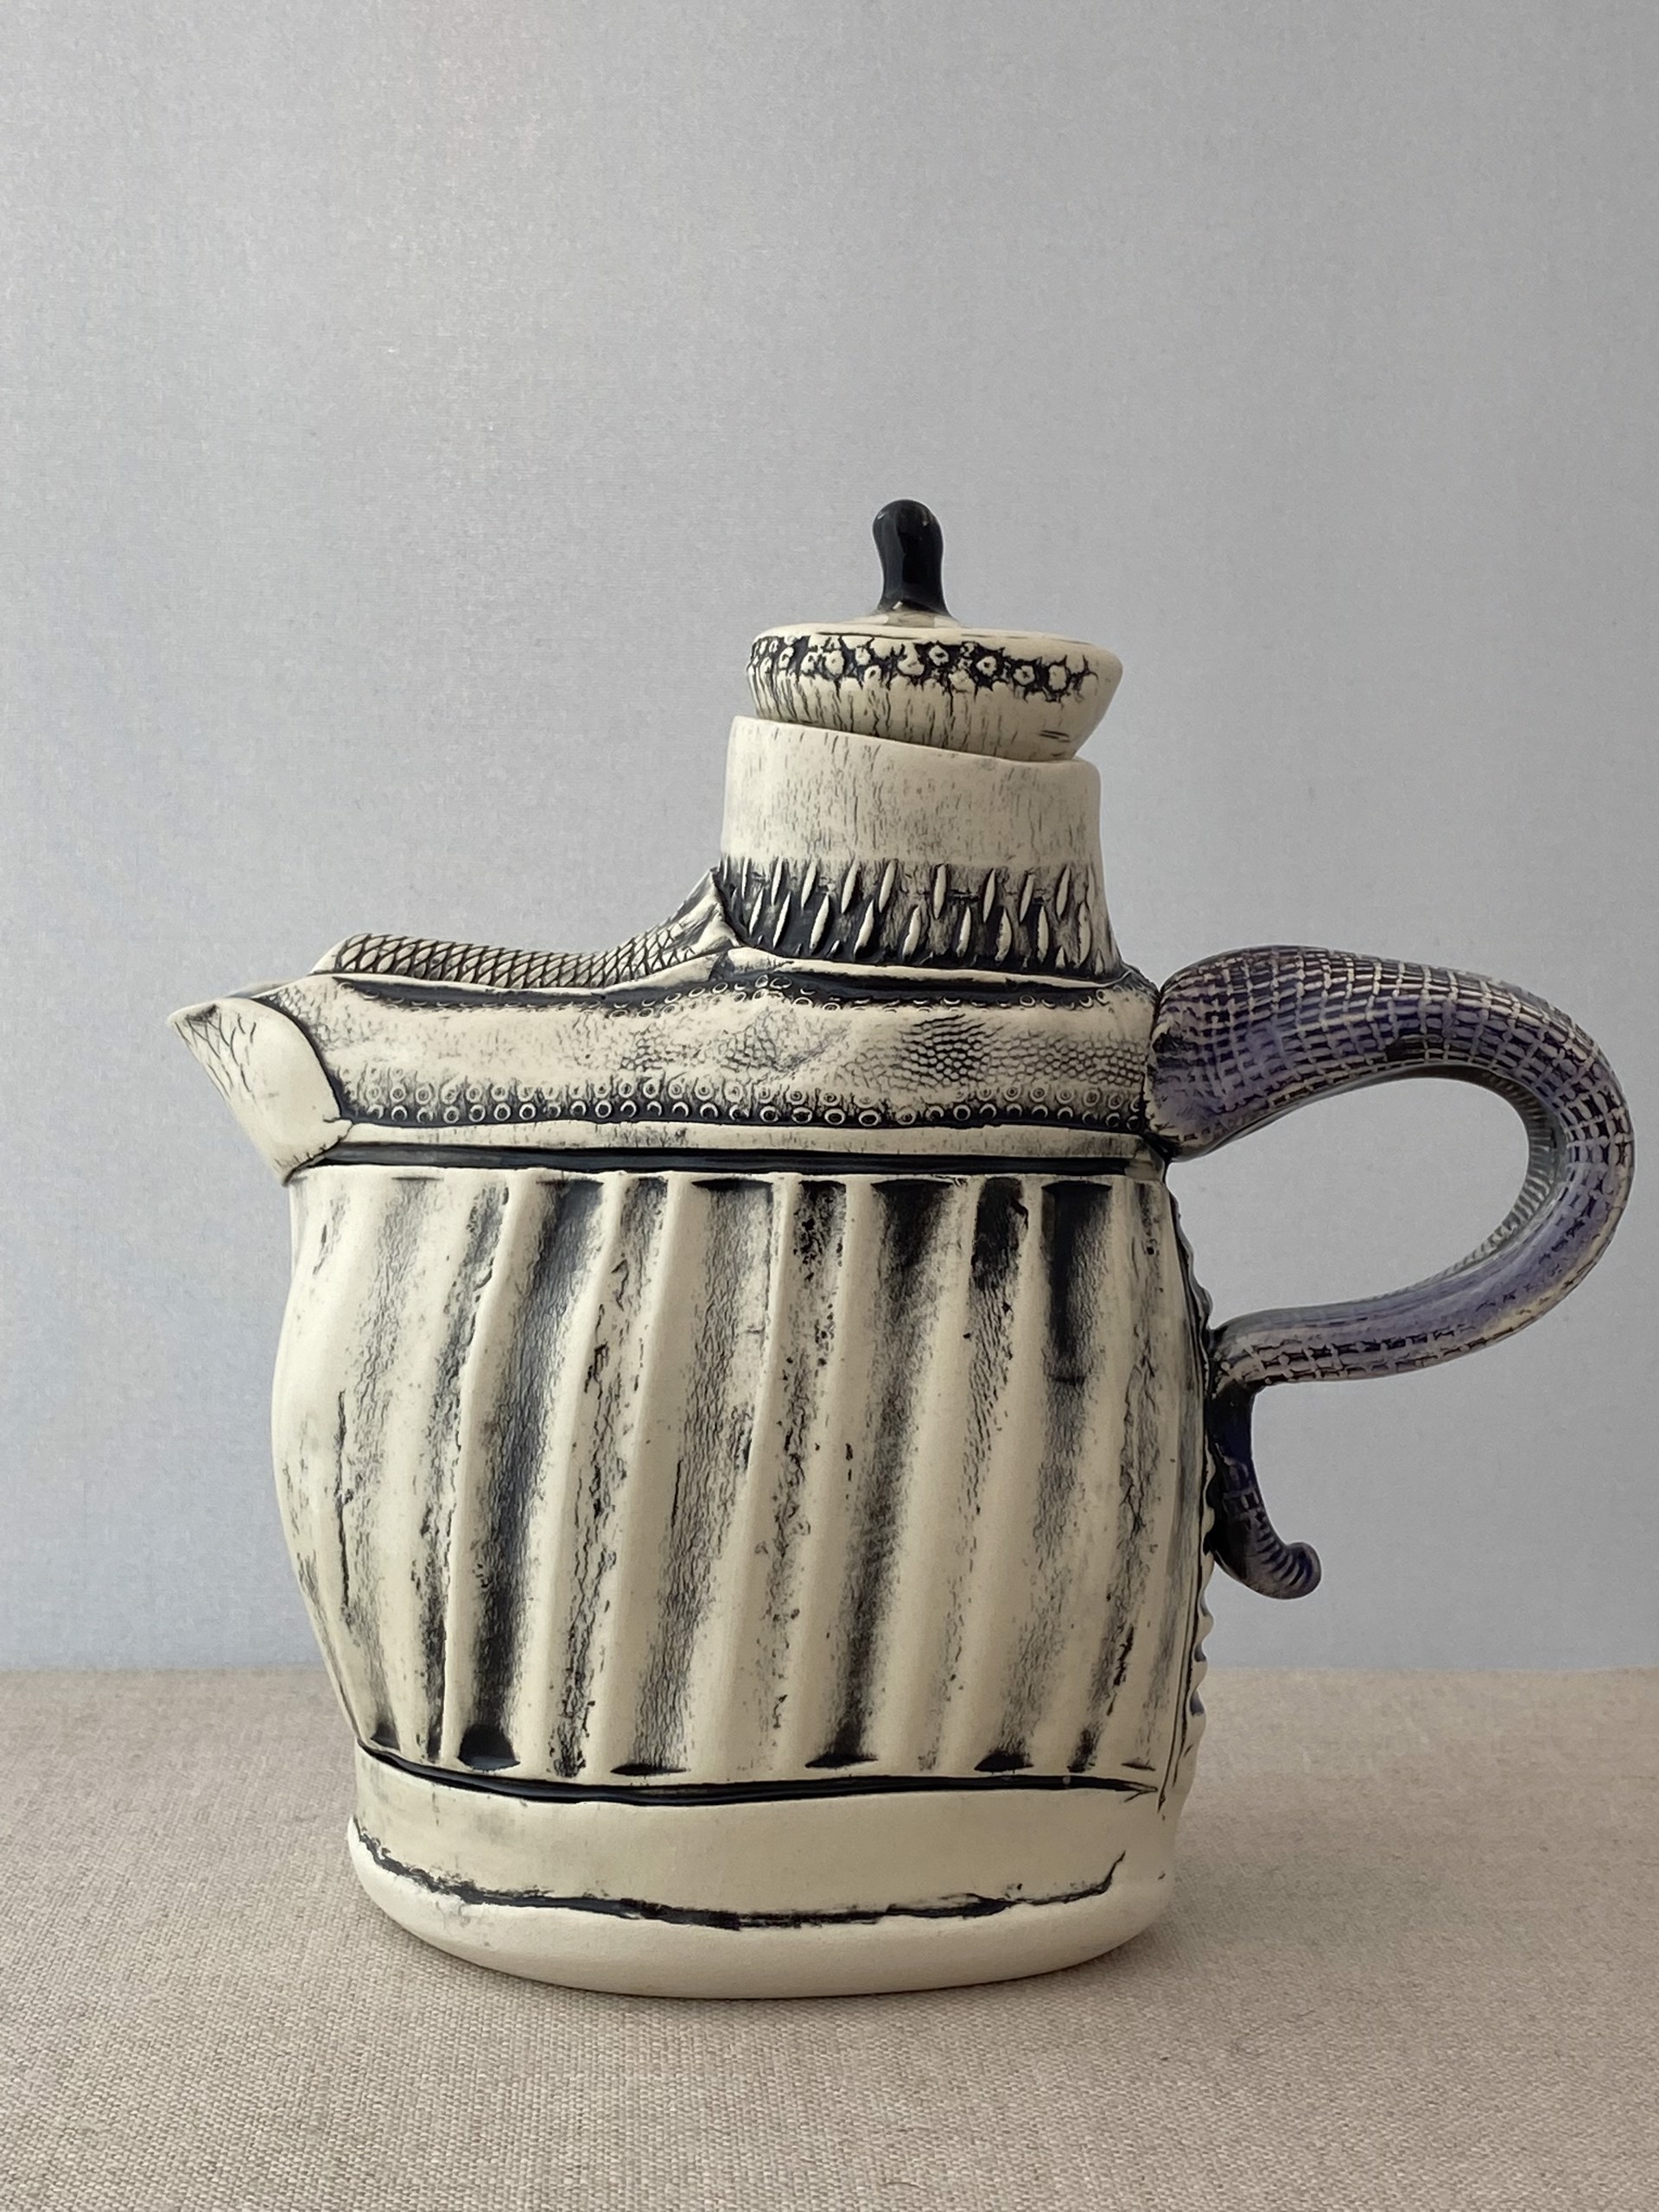 Teapot by Barbara Campbell